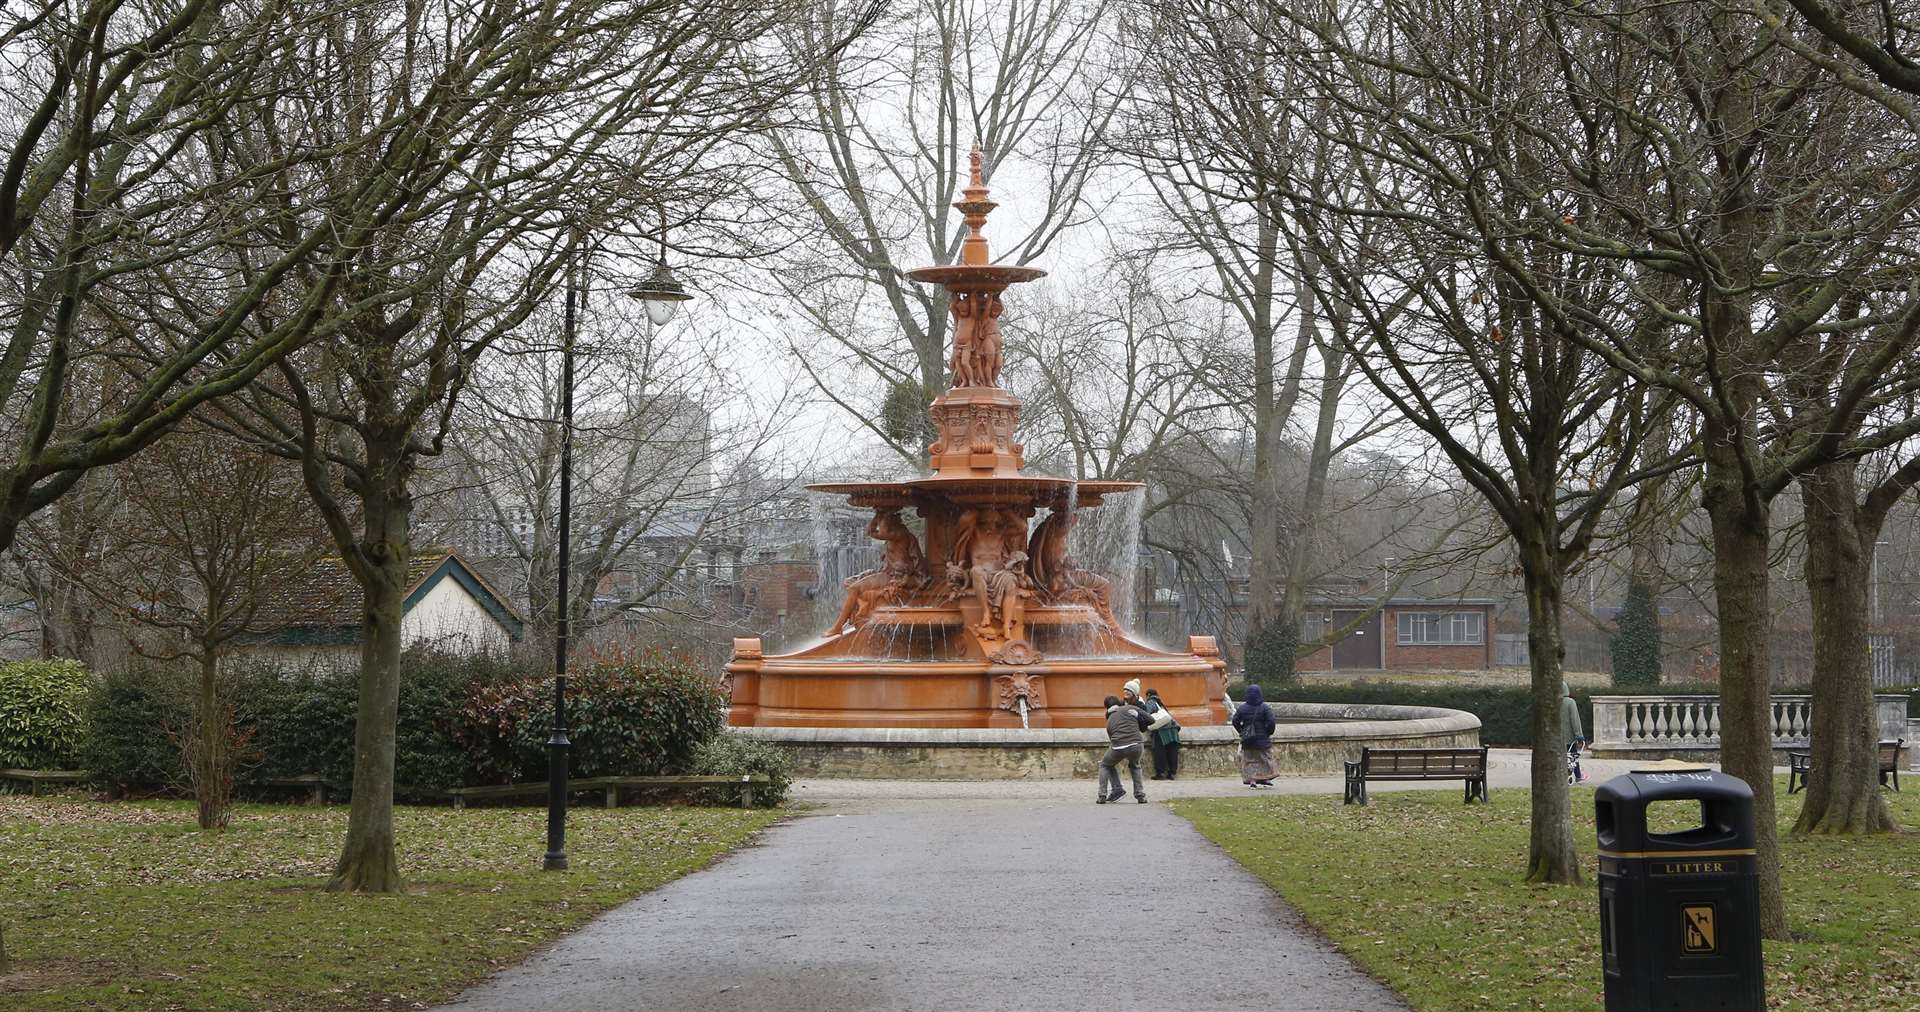 The fountain at Victoria Park, Ashford Picture: Andy Jones